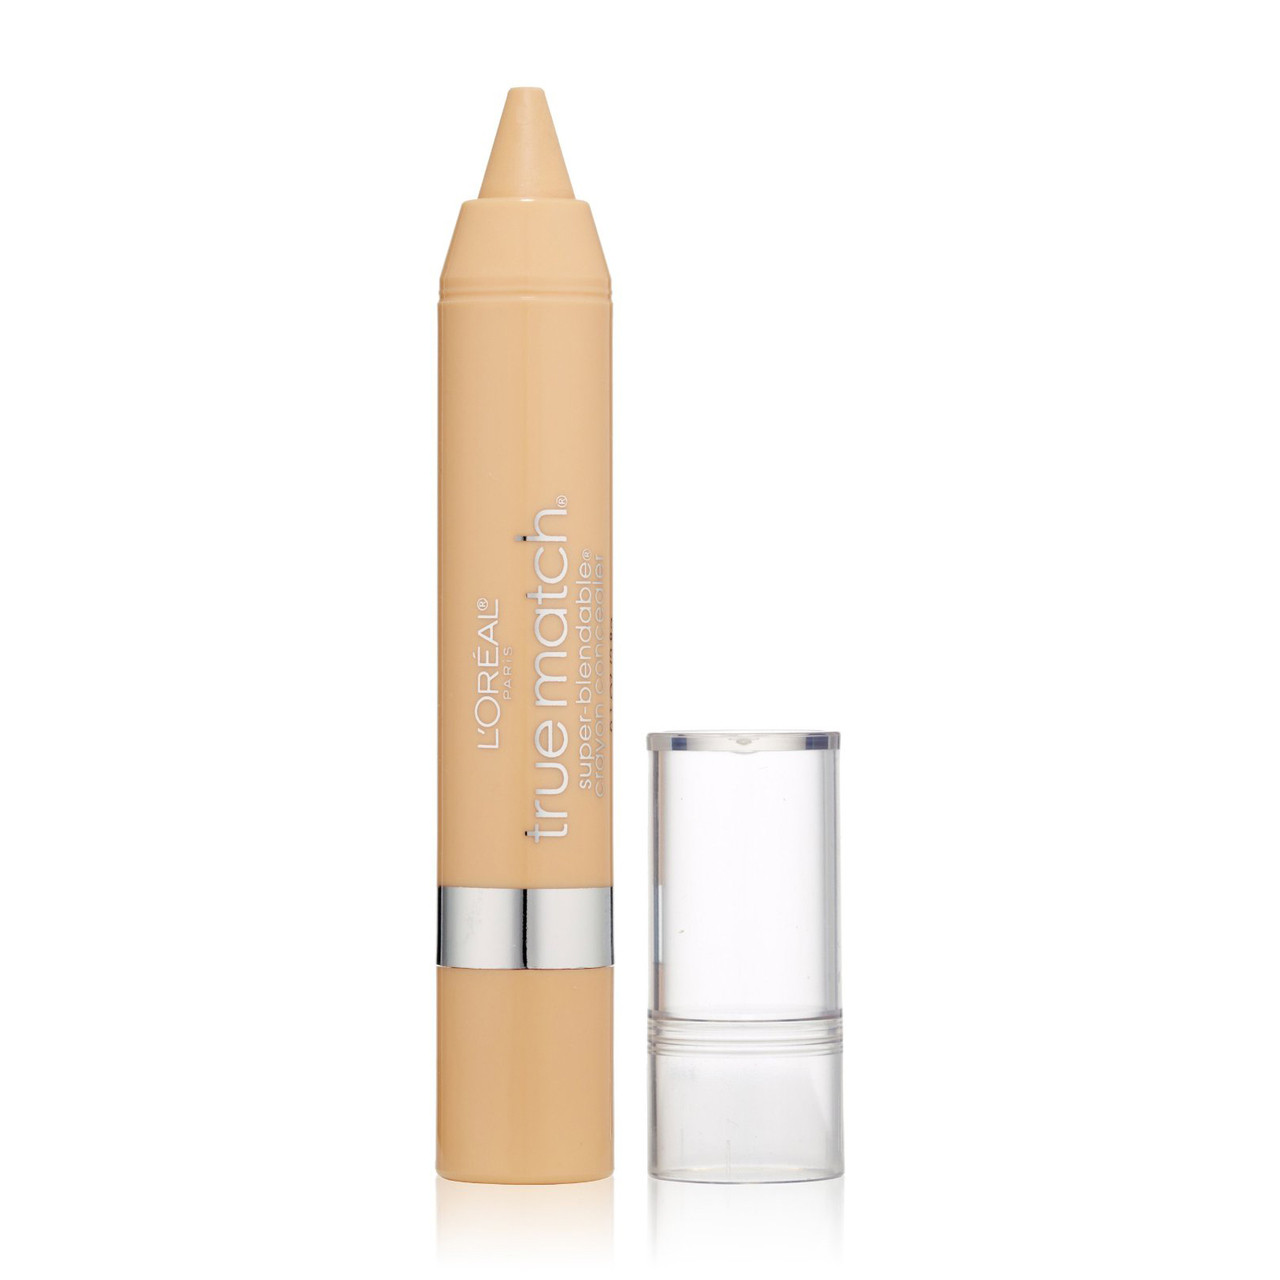 L'Oreal True Match Crayon Concealer - Warm Fair Light (W1-2-3) - Hard To  Find Beauty